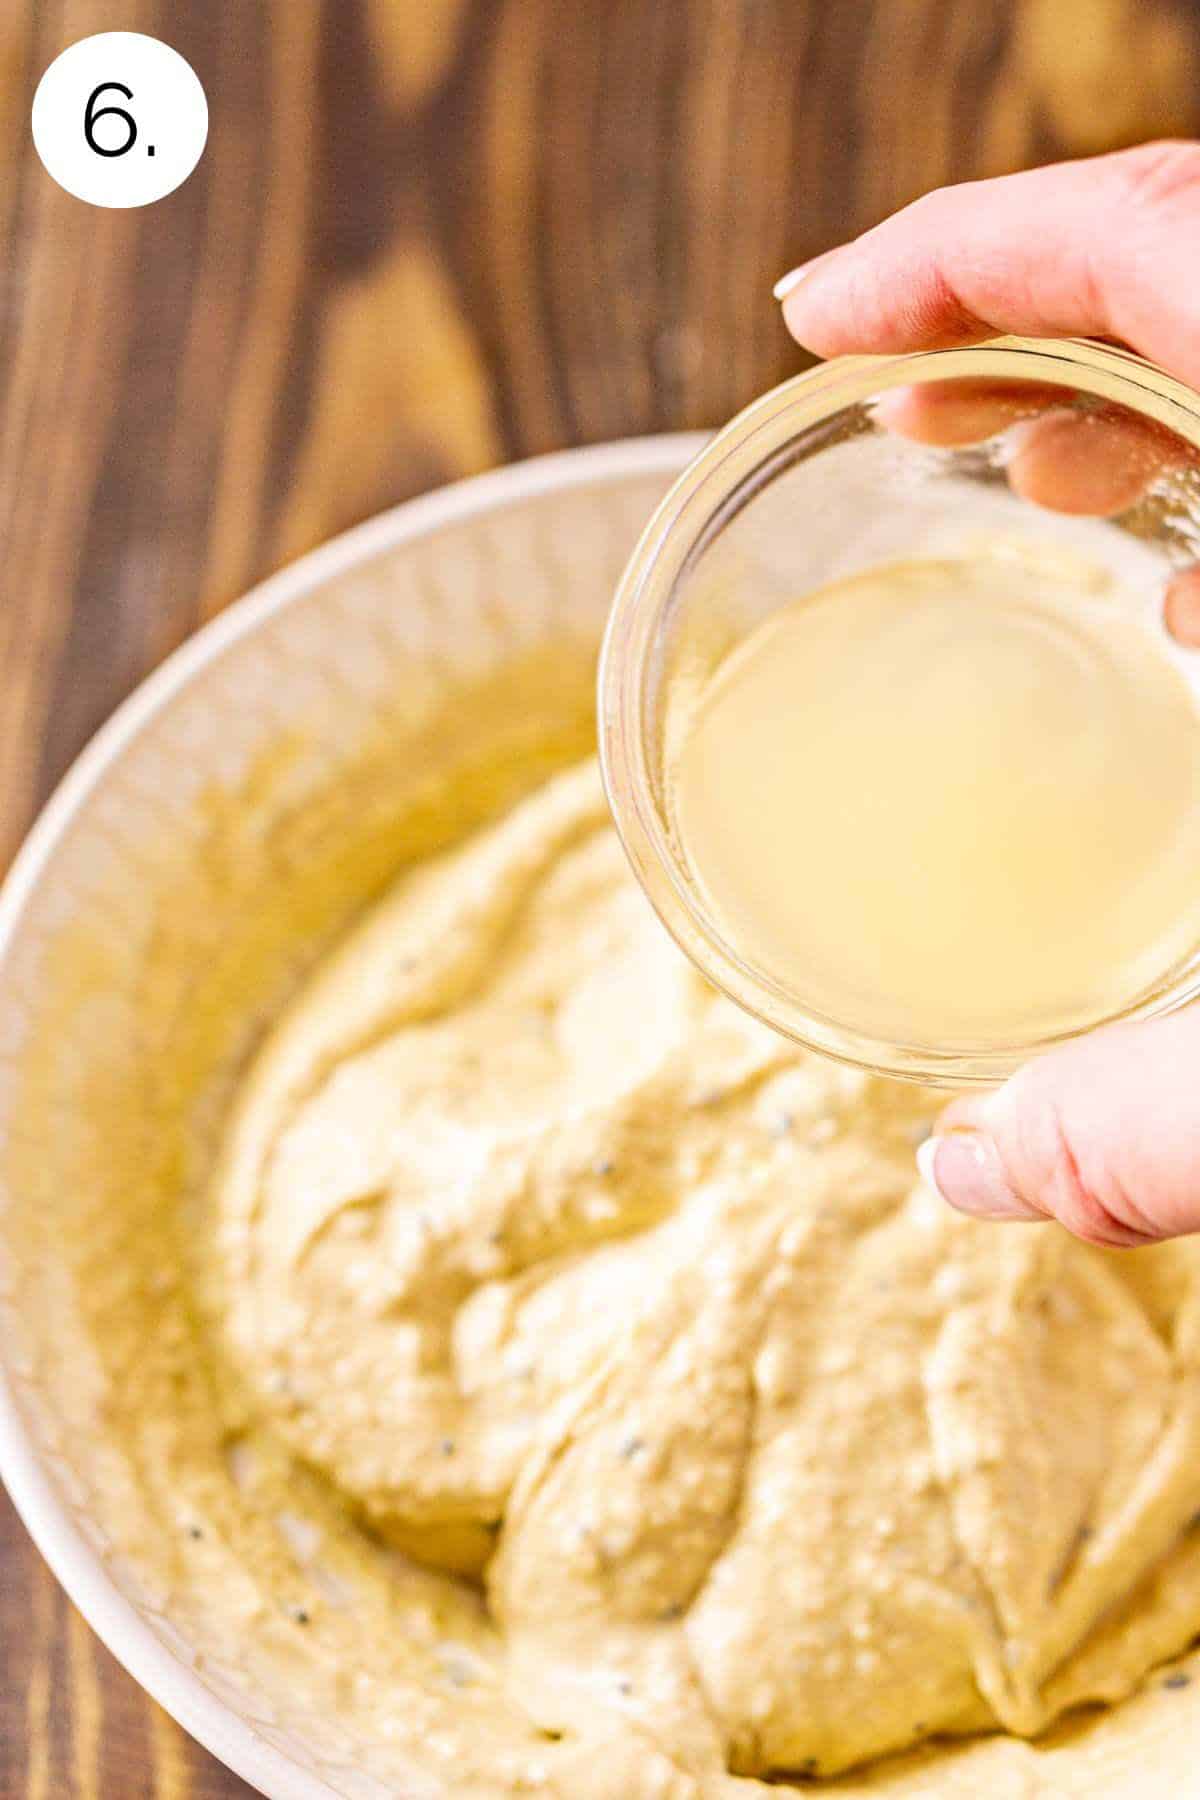 A hand holding a small bowl of the reserved chickpea liquid as it's about to pour it into the hummus to thin out.